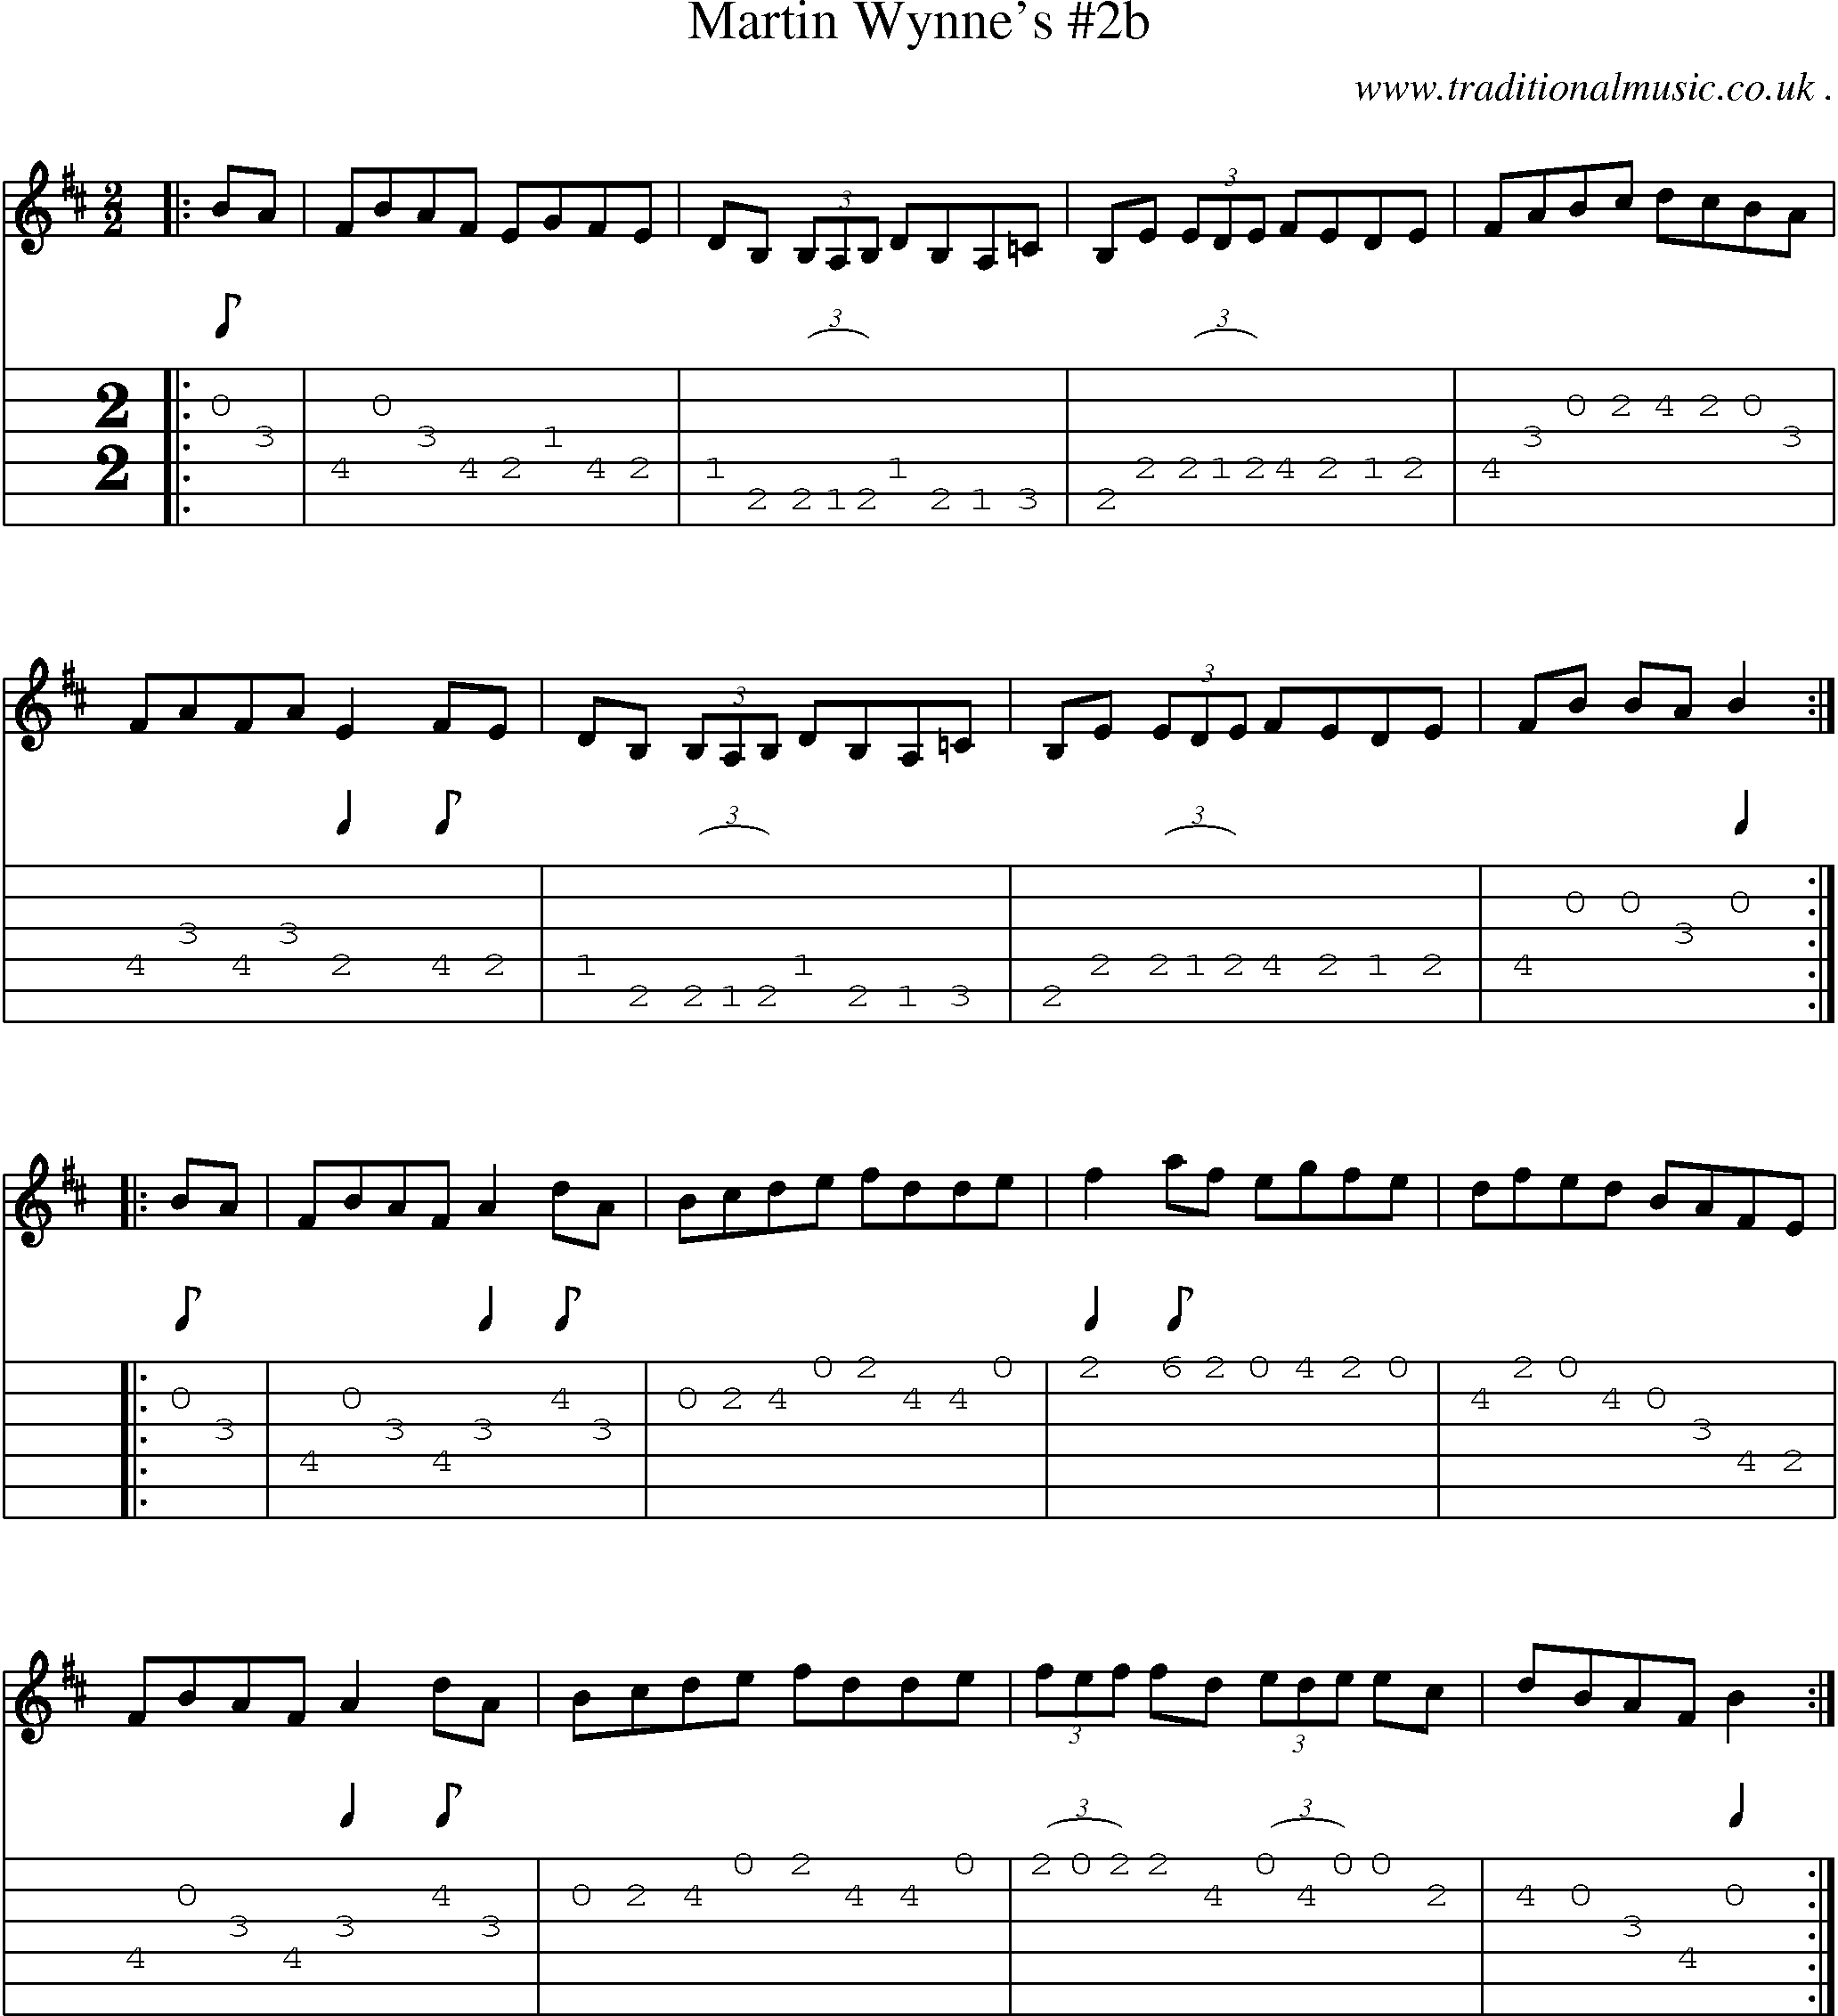 Sheet-Music and Guitar Tabs for Martin Wynnes 2b